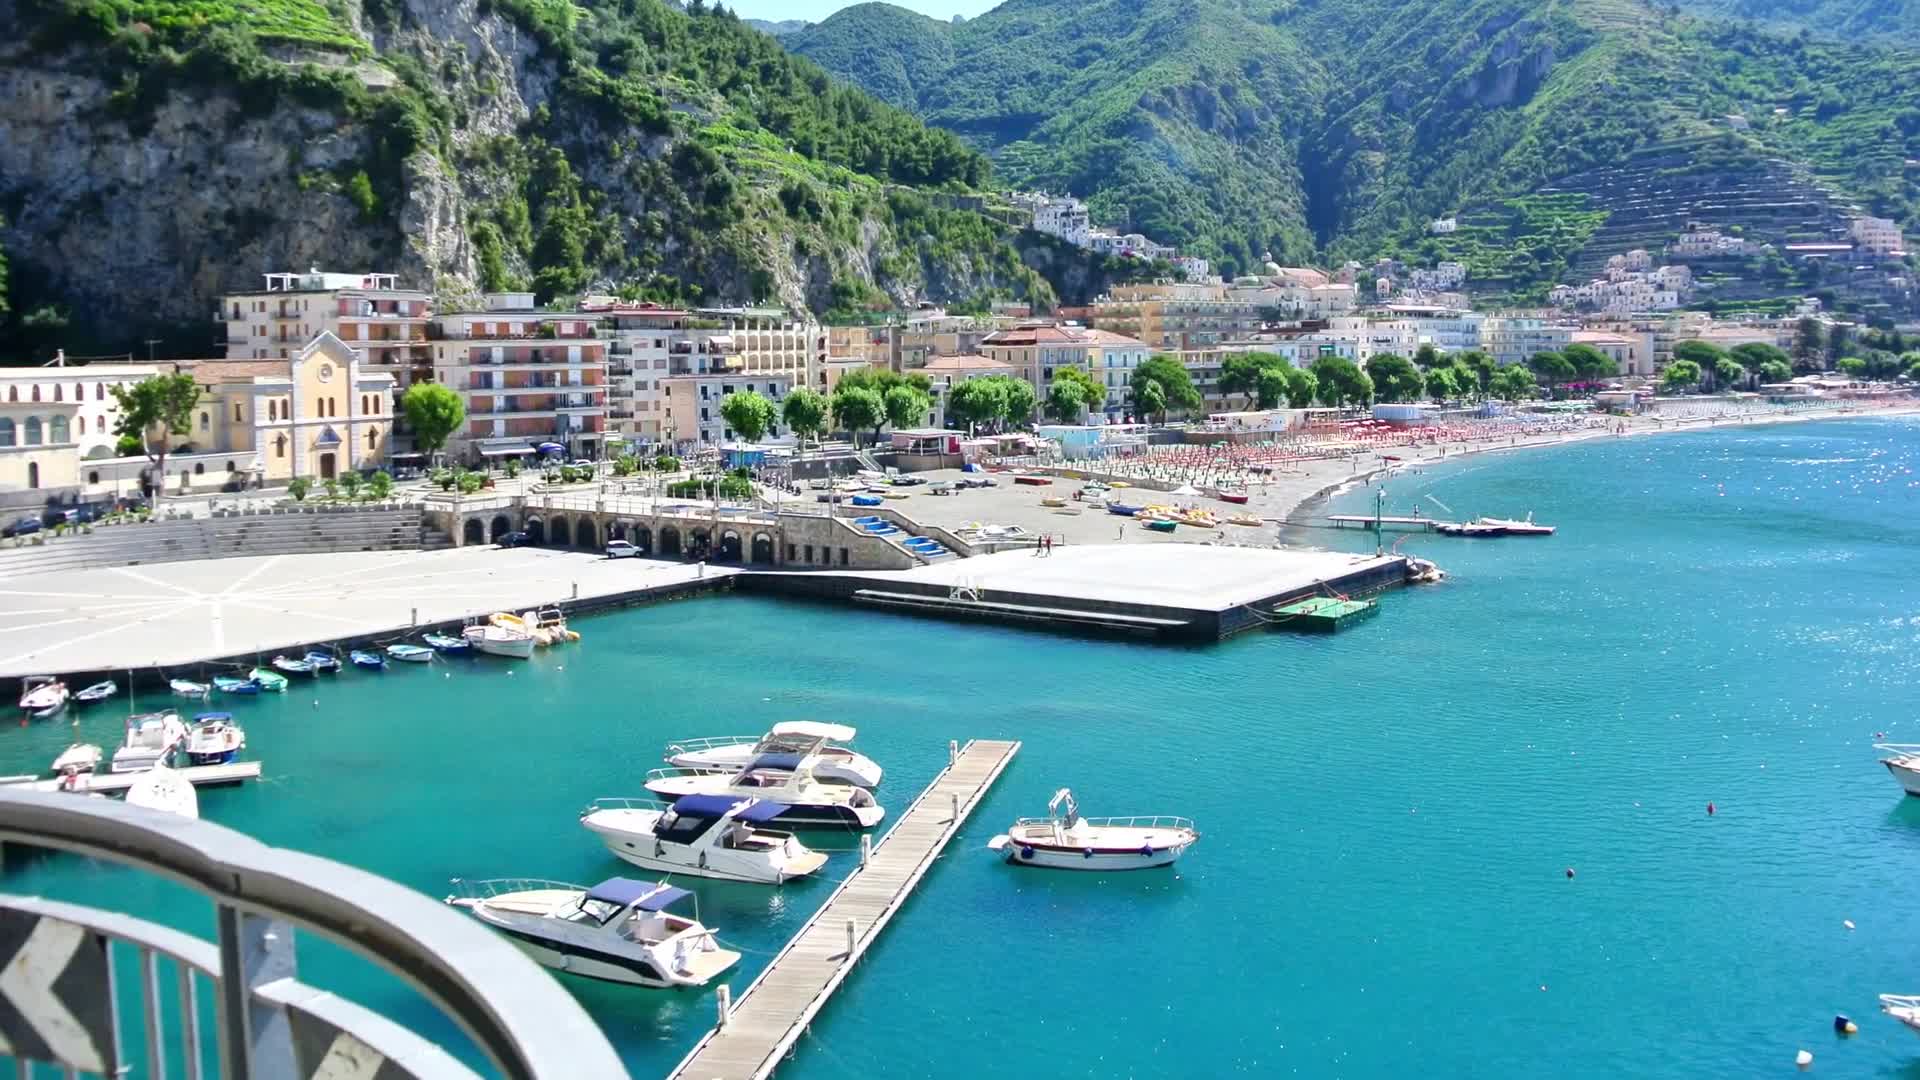 7 things to do in Maiori at Amalfi Coast- what to do and see